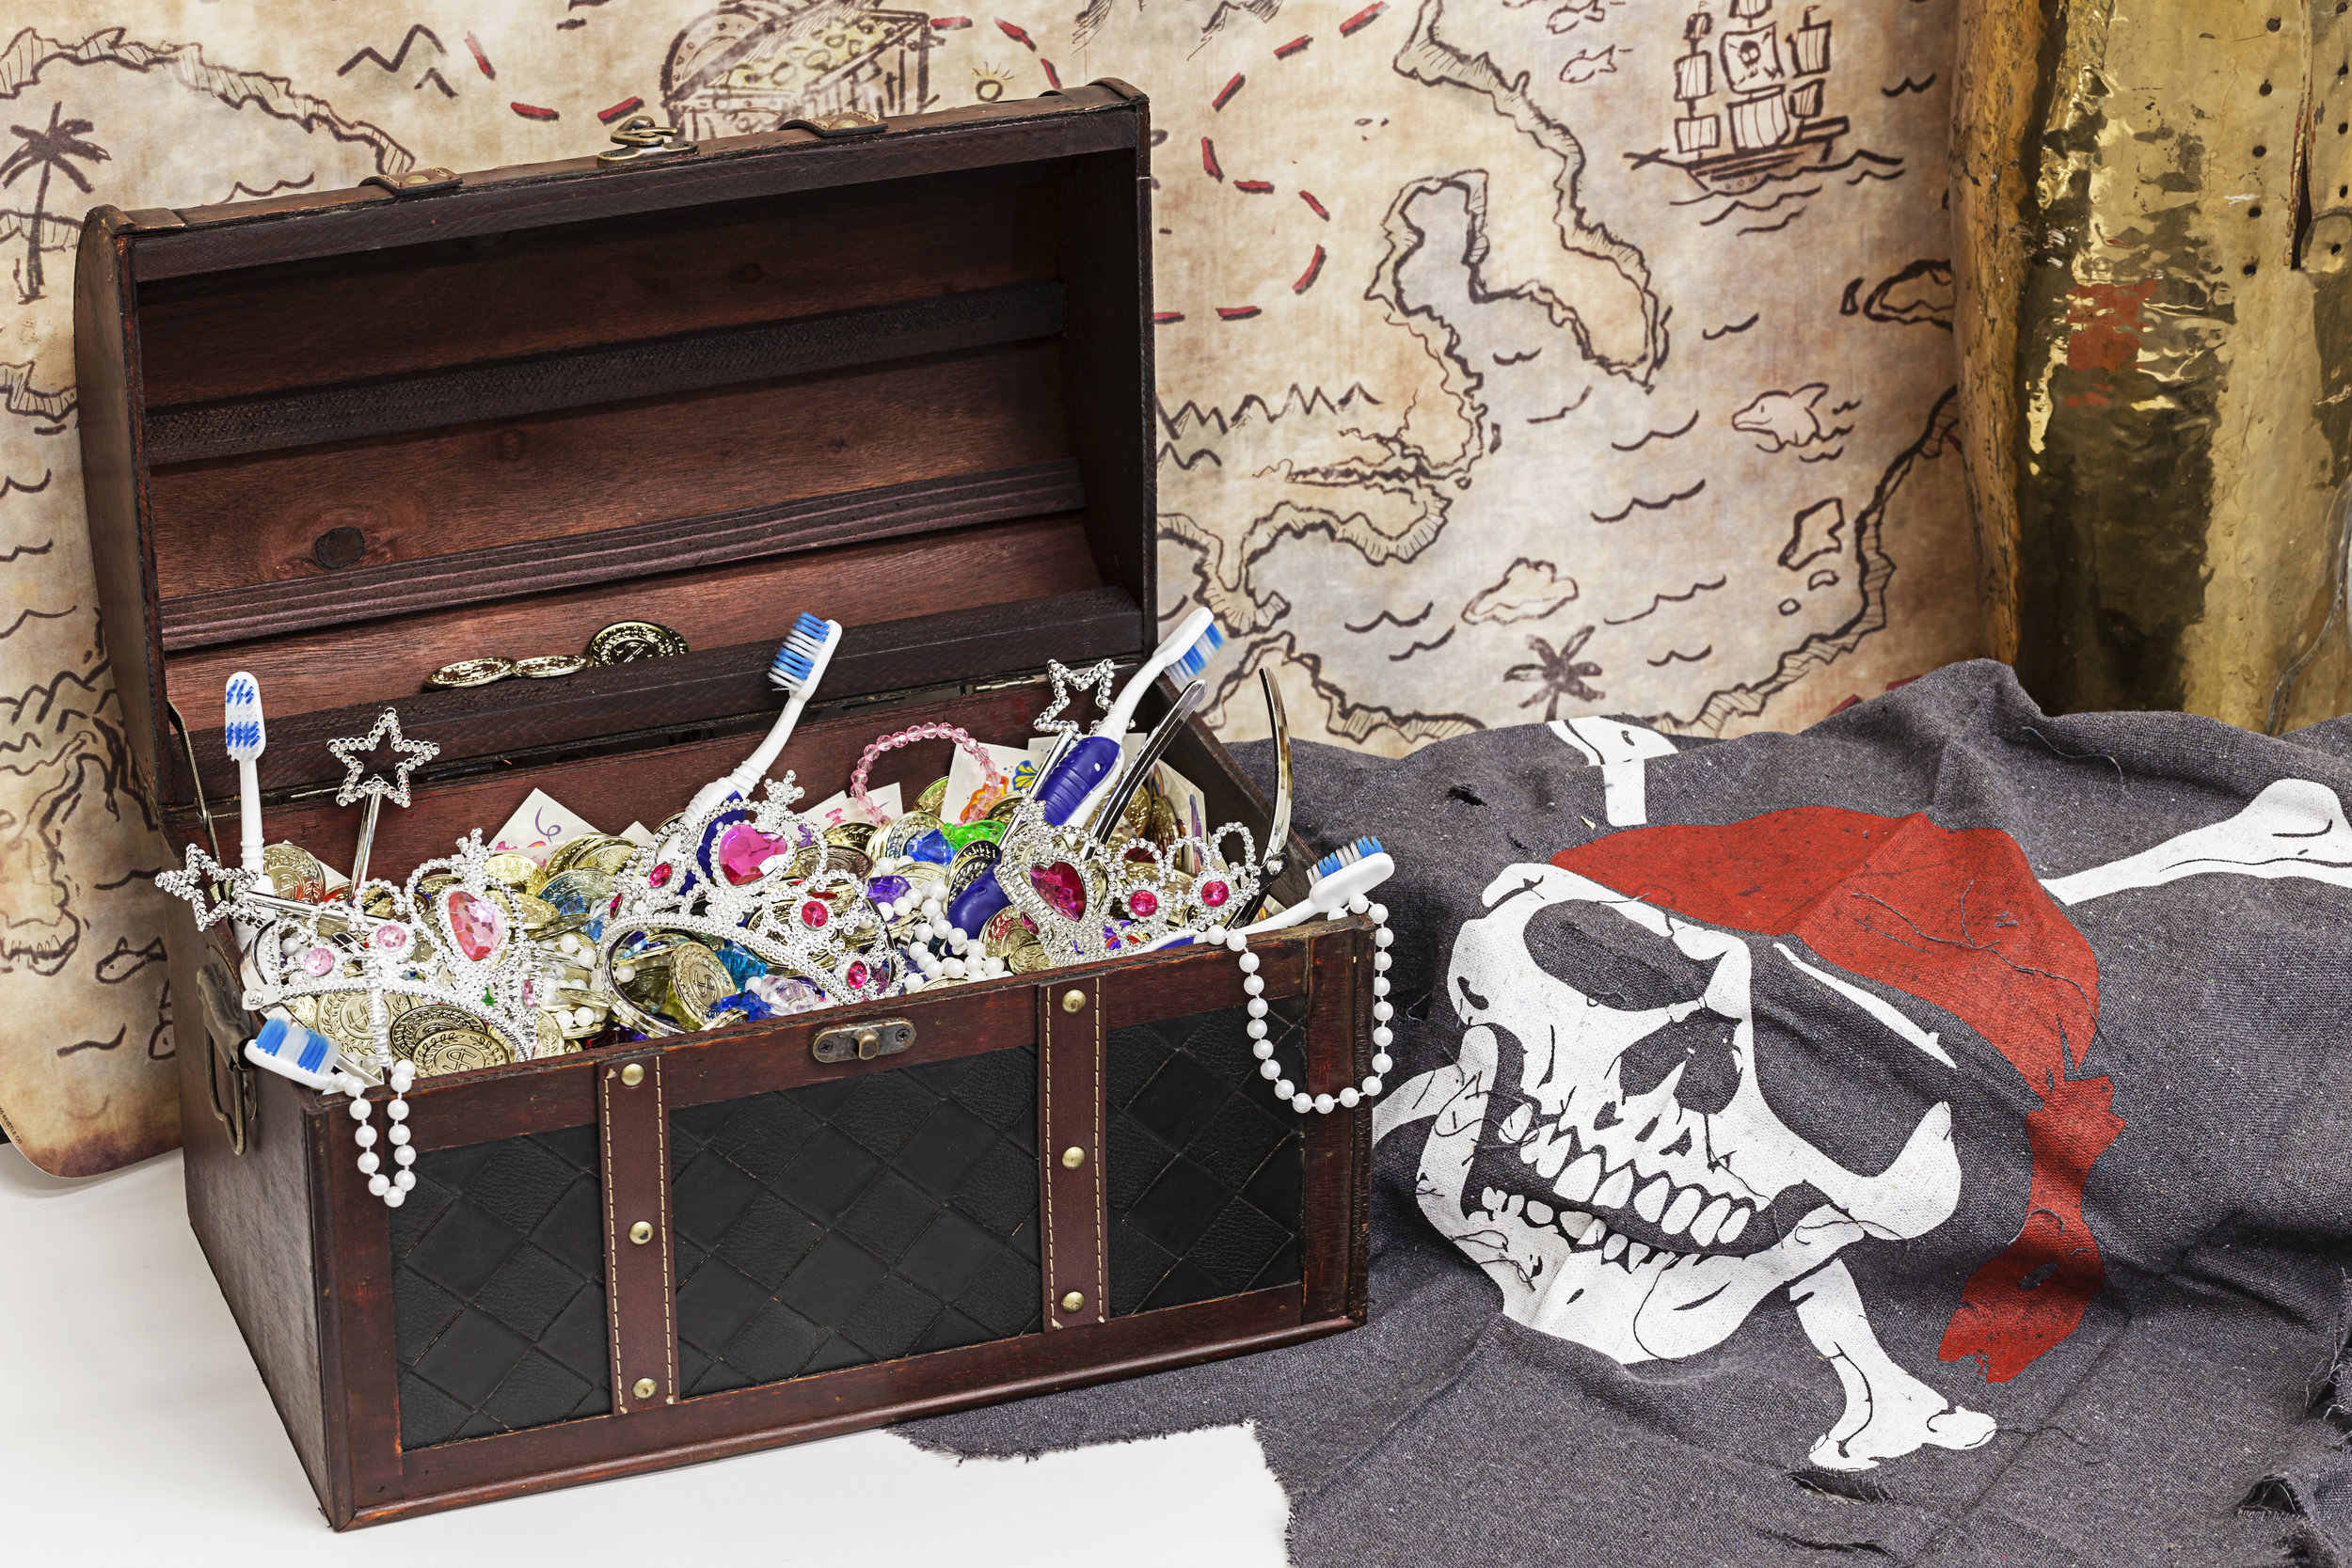 Toothbrushes and toy treasure chest for the kids